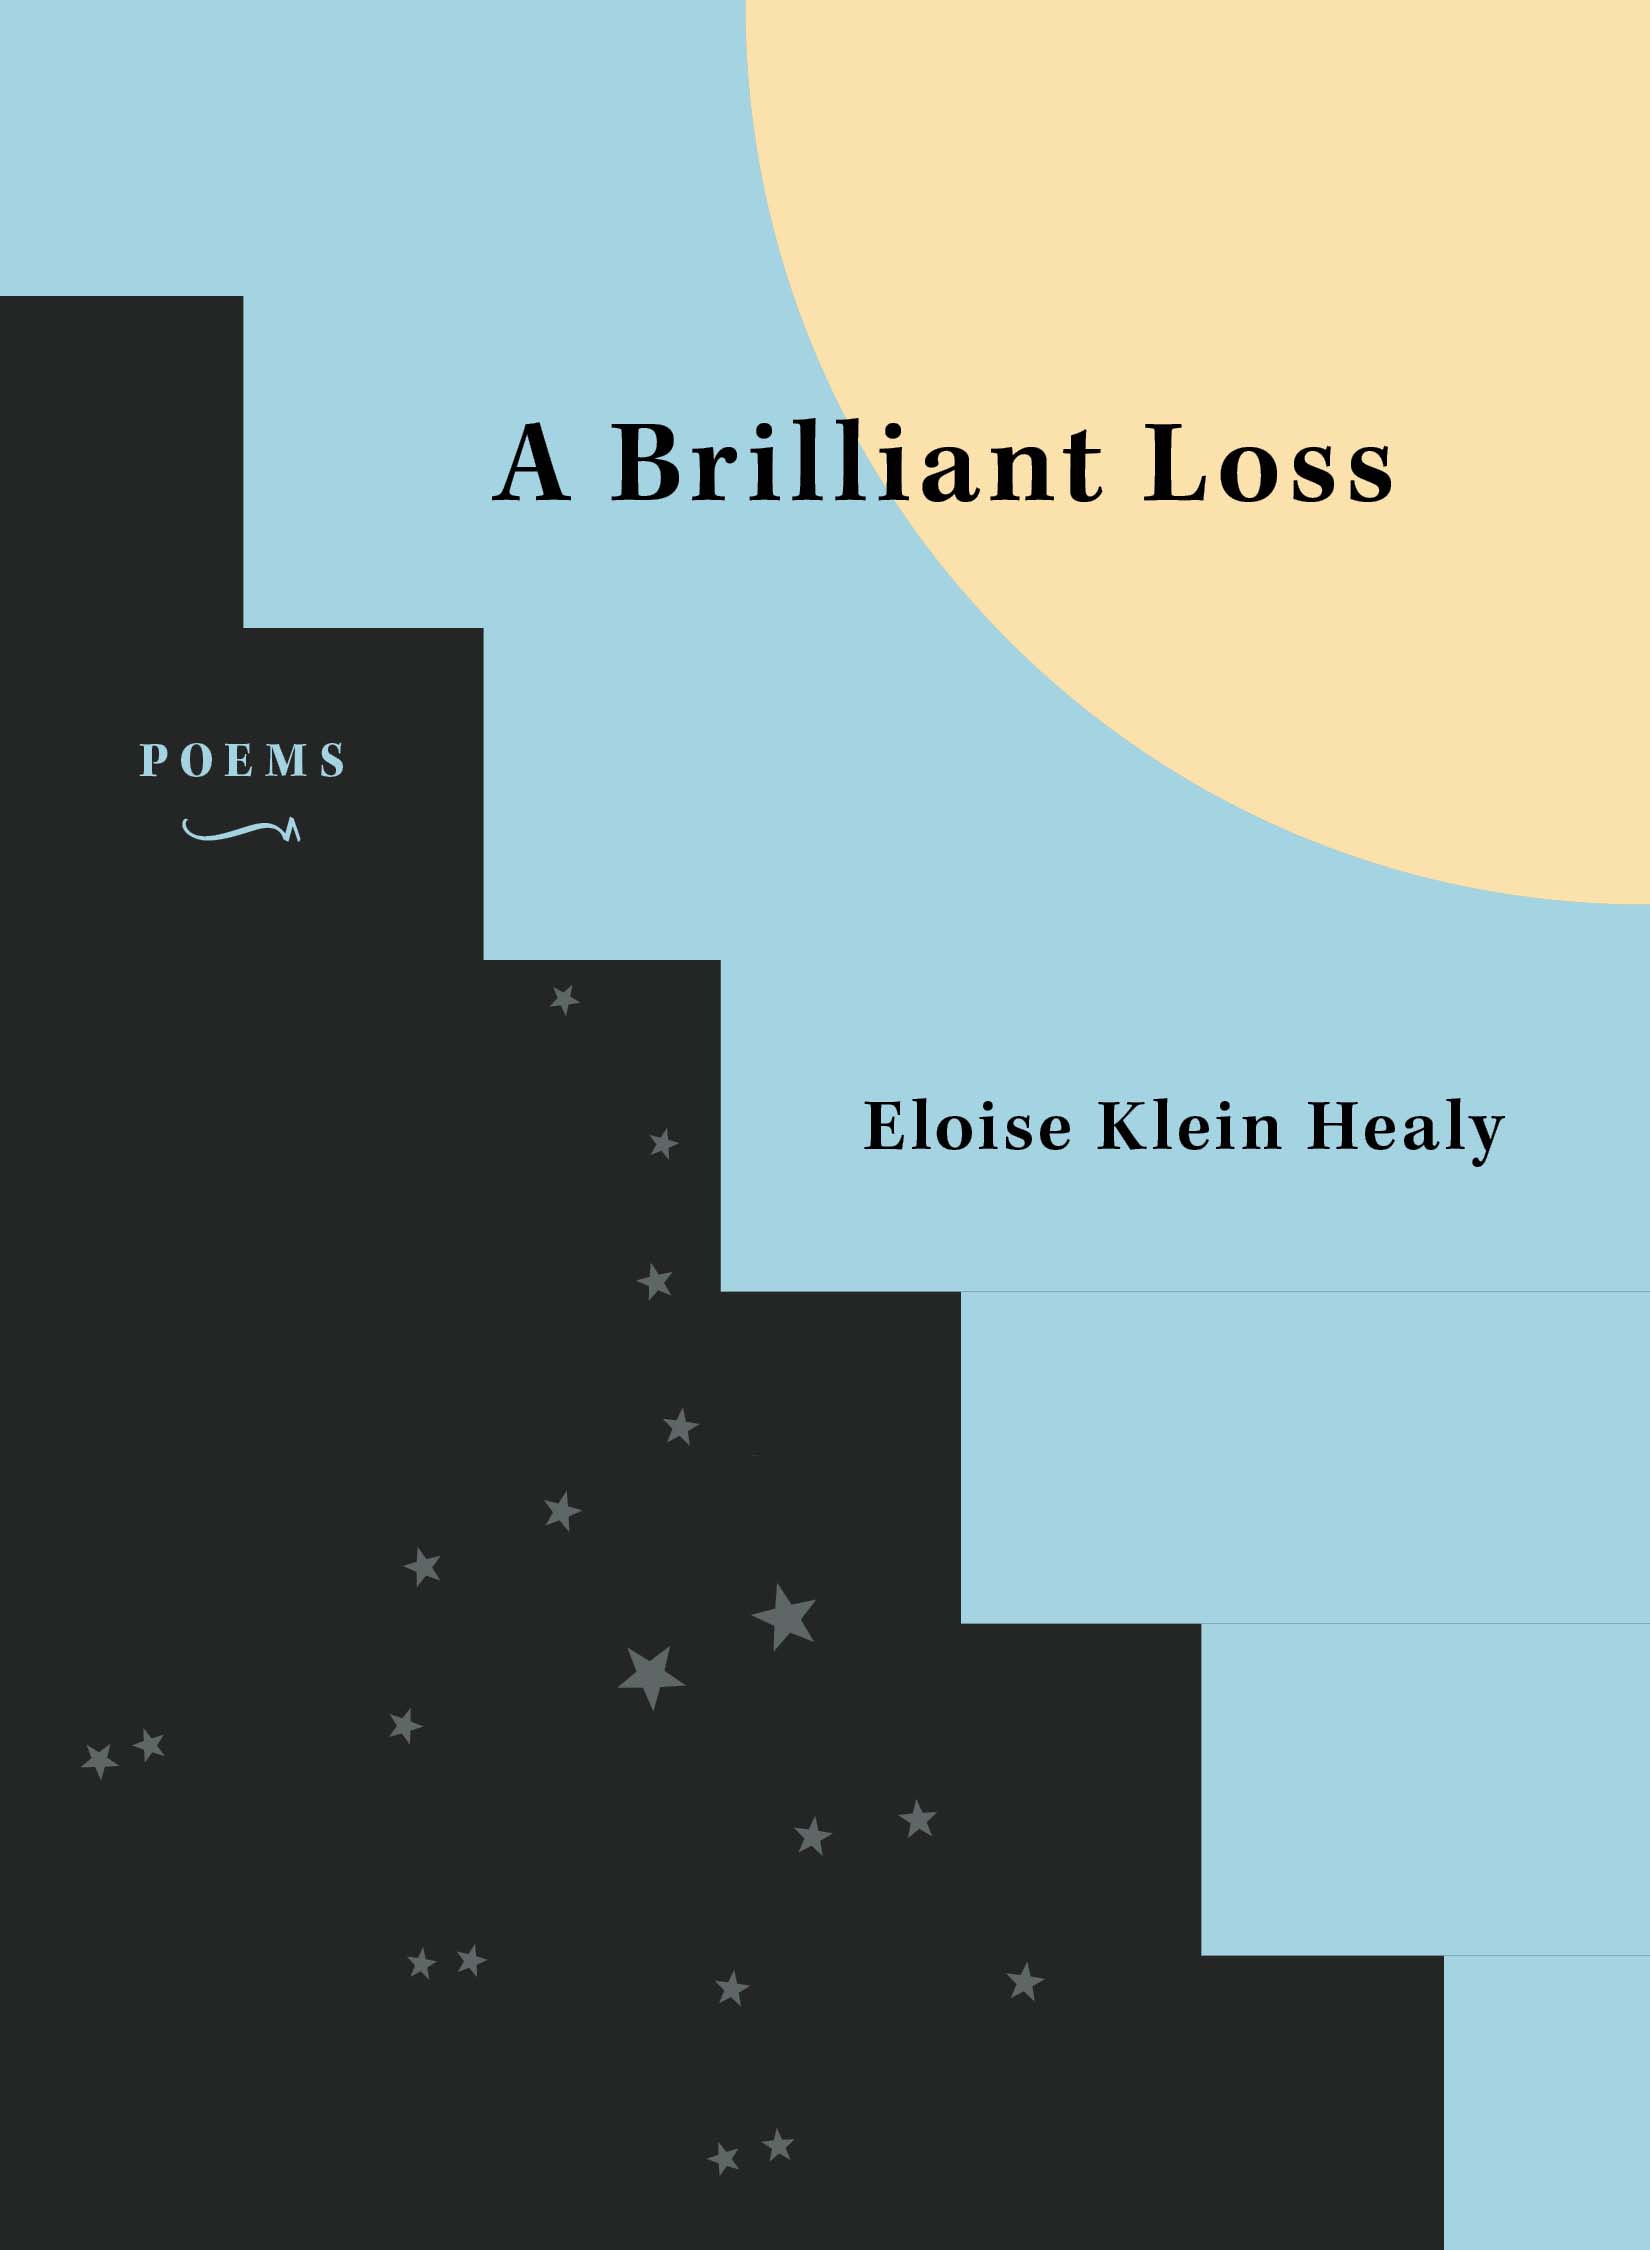 A Brilliant Loss: poems by Eloise Klein Healy